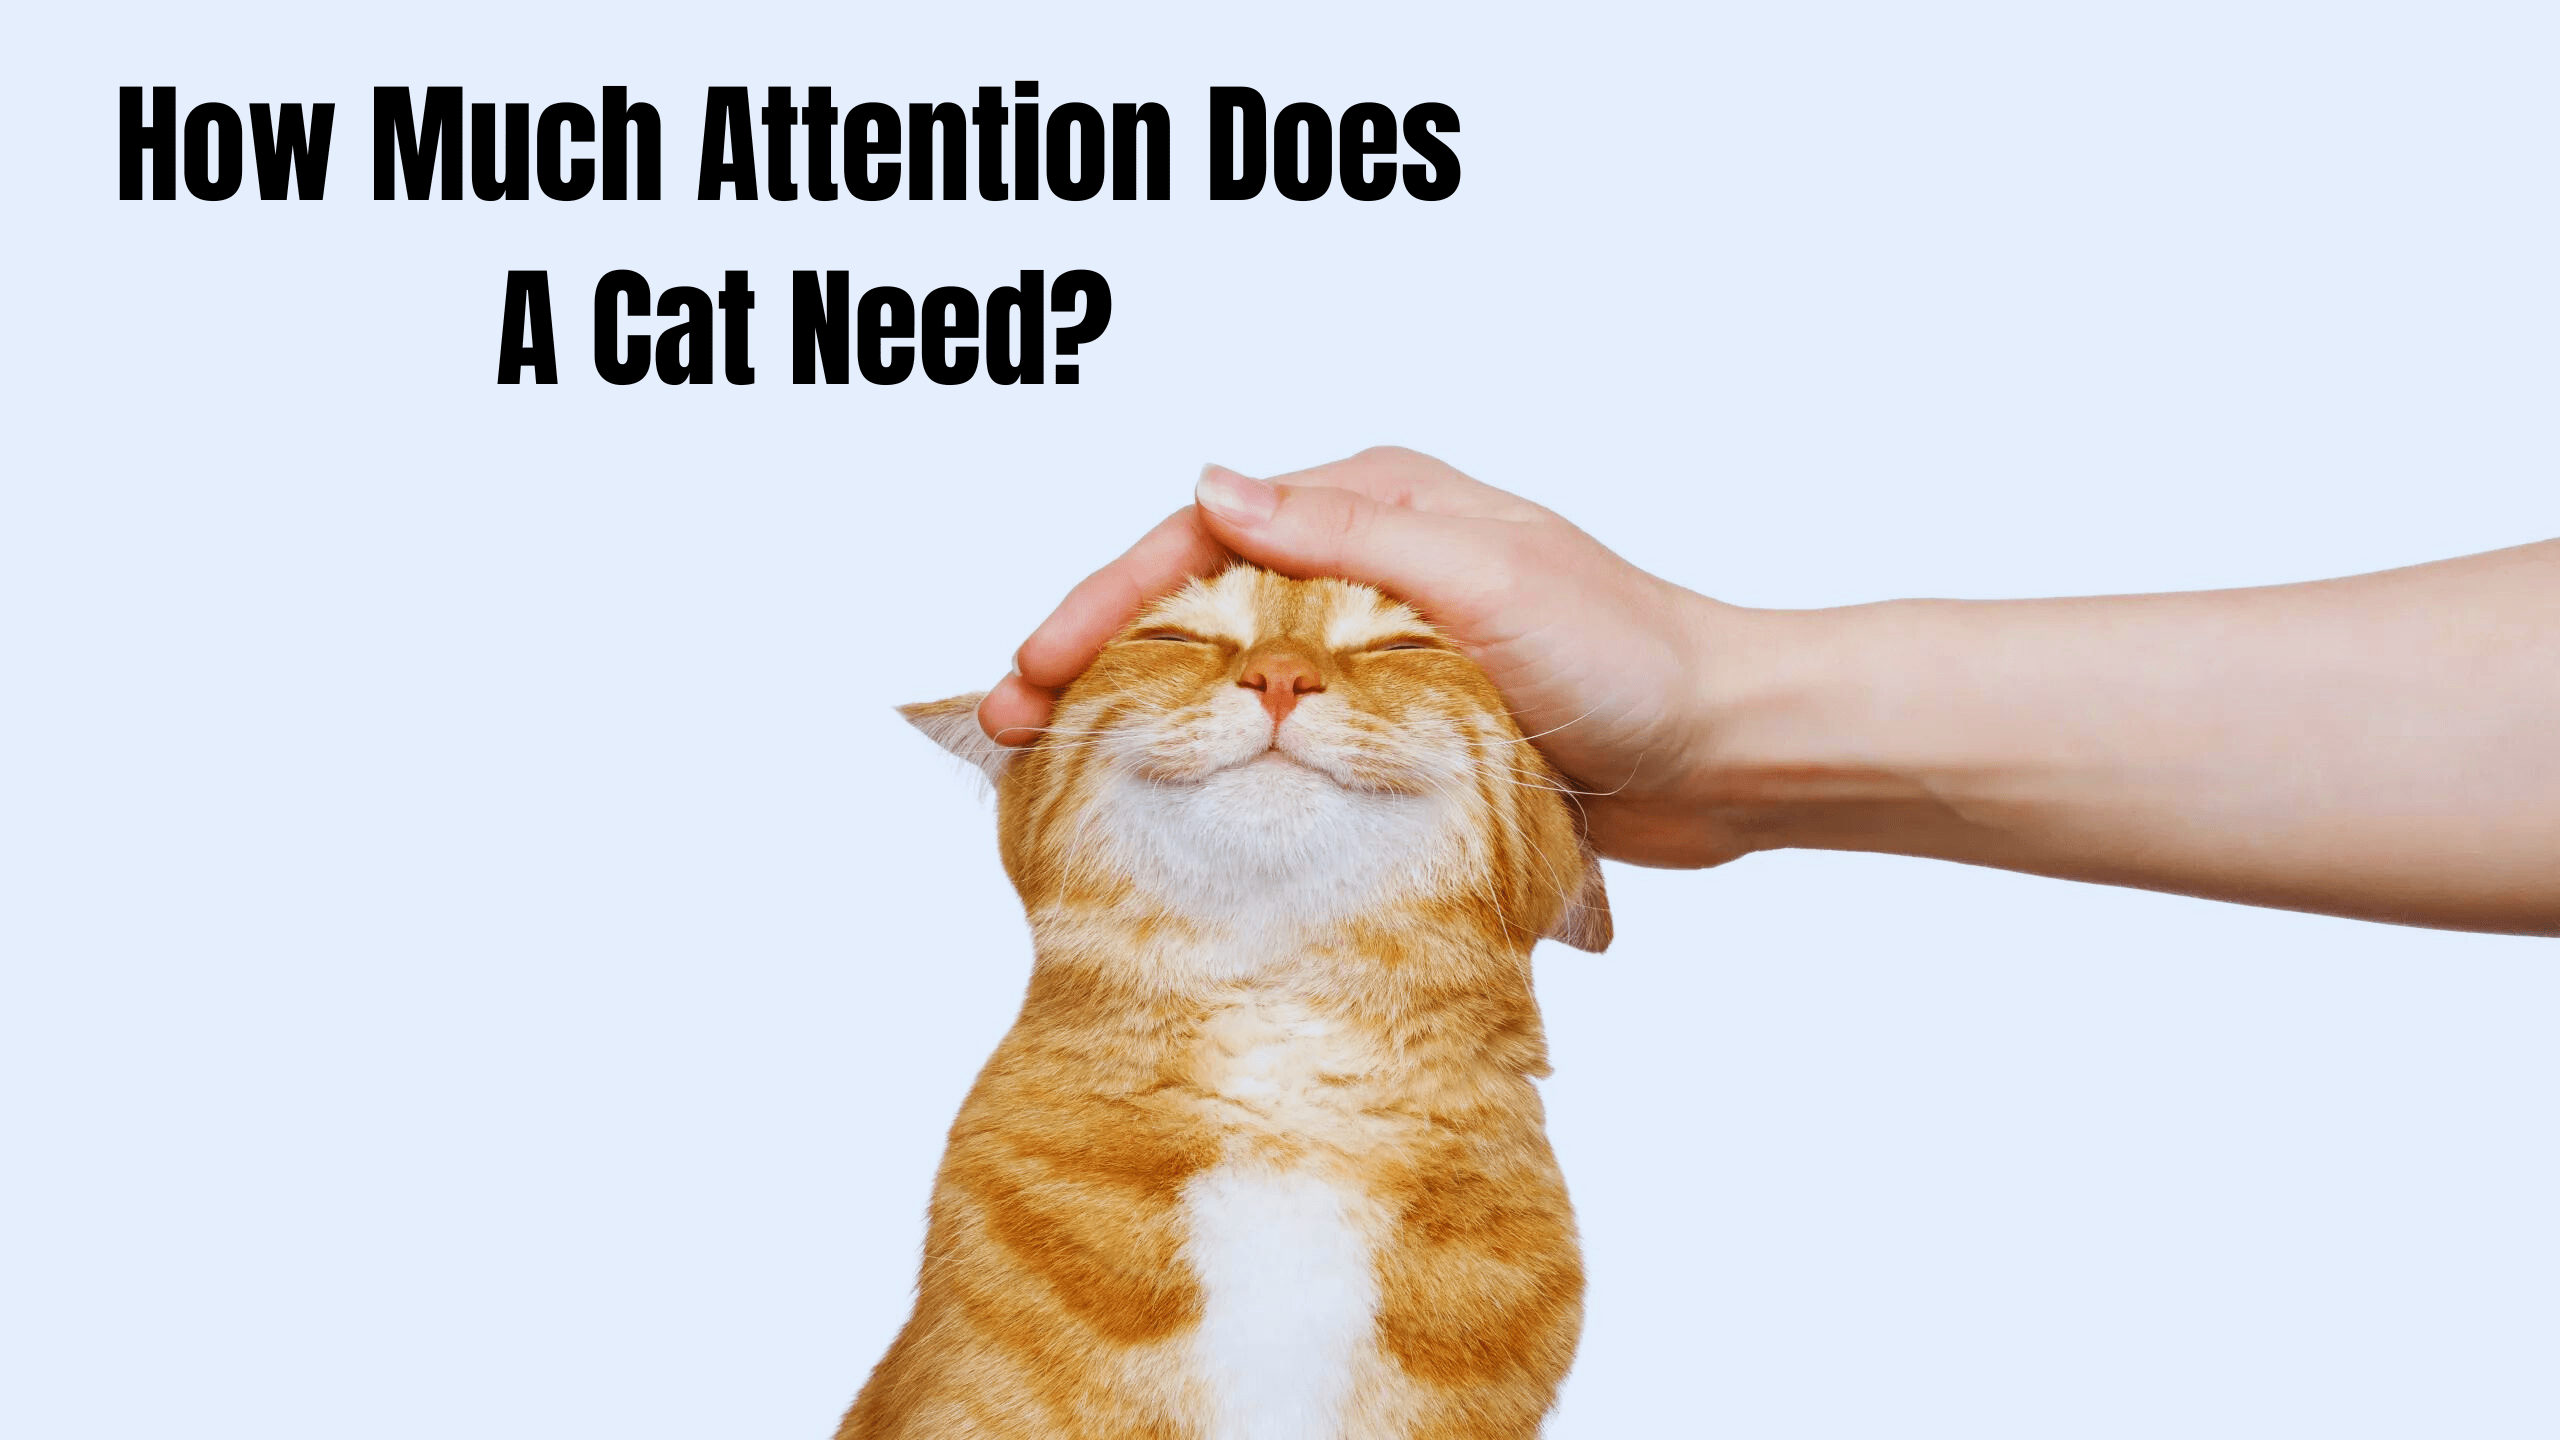 How Much Attention Does A Cat Need?